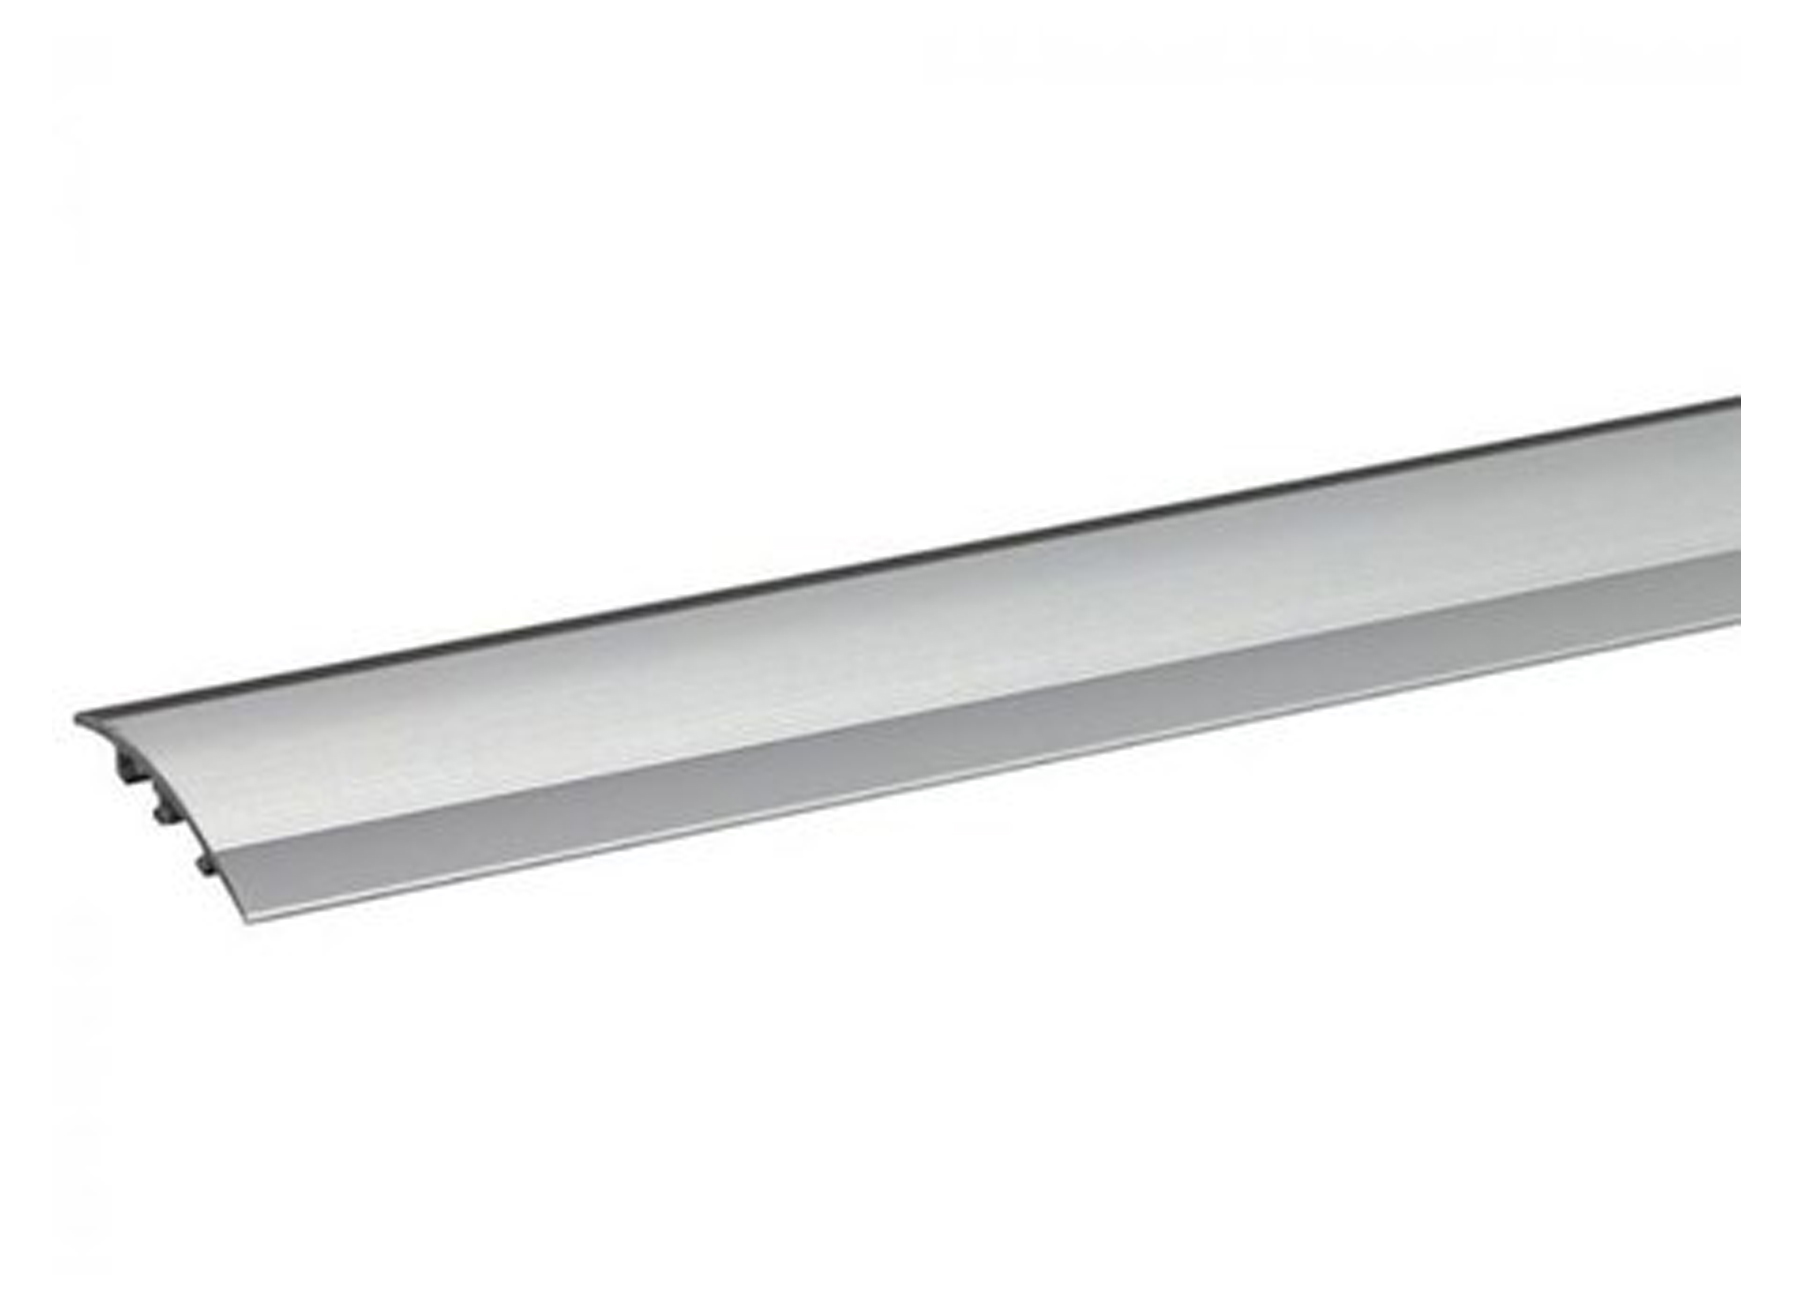 JEWE BARRE DE SEUIL RATTRAPAGE 47MM ARGENT 190CM